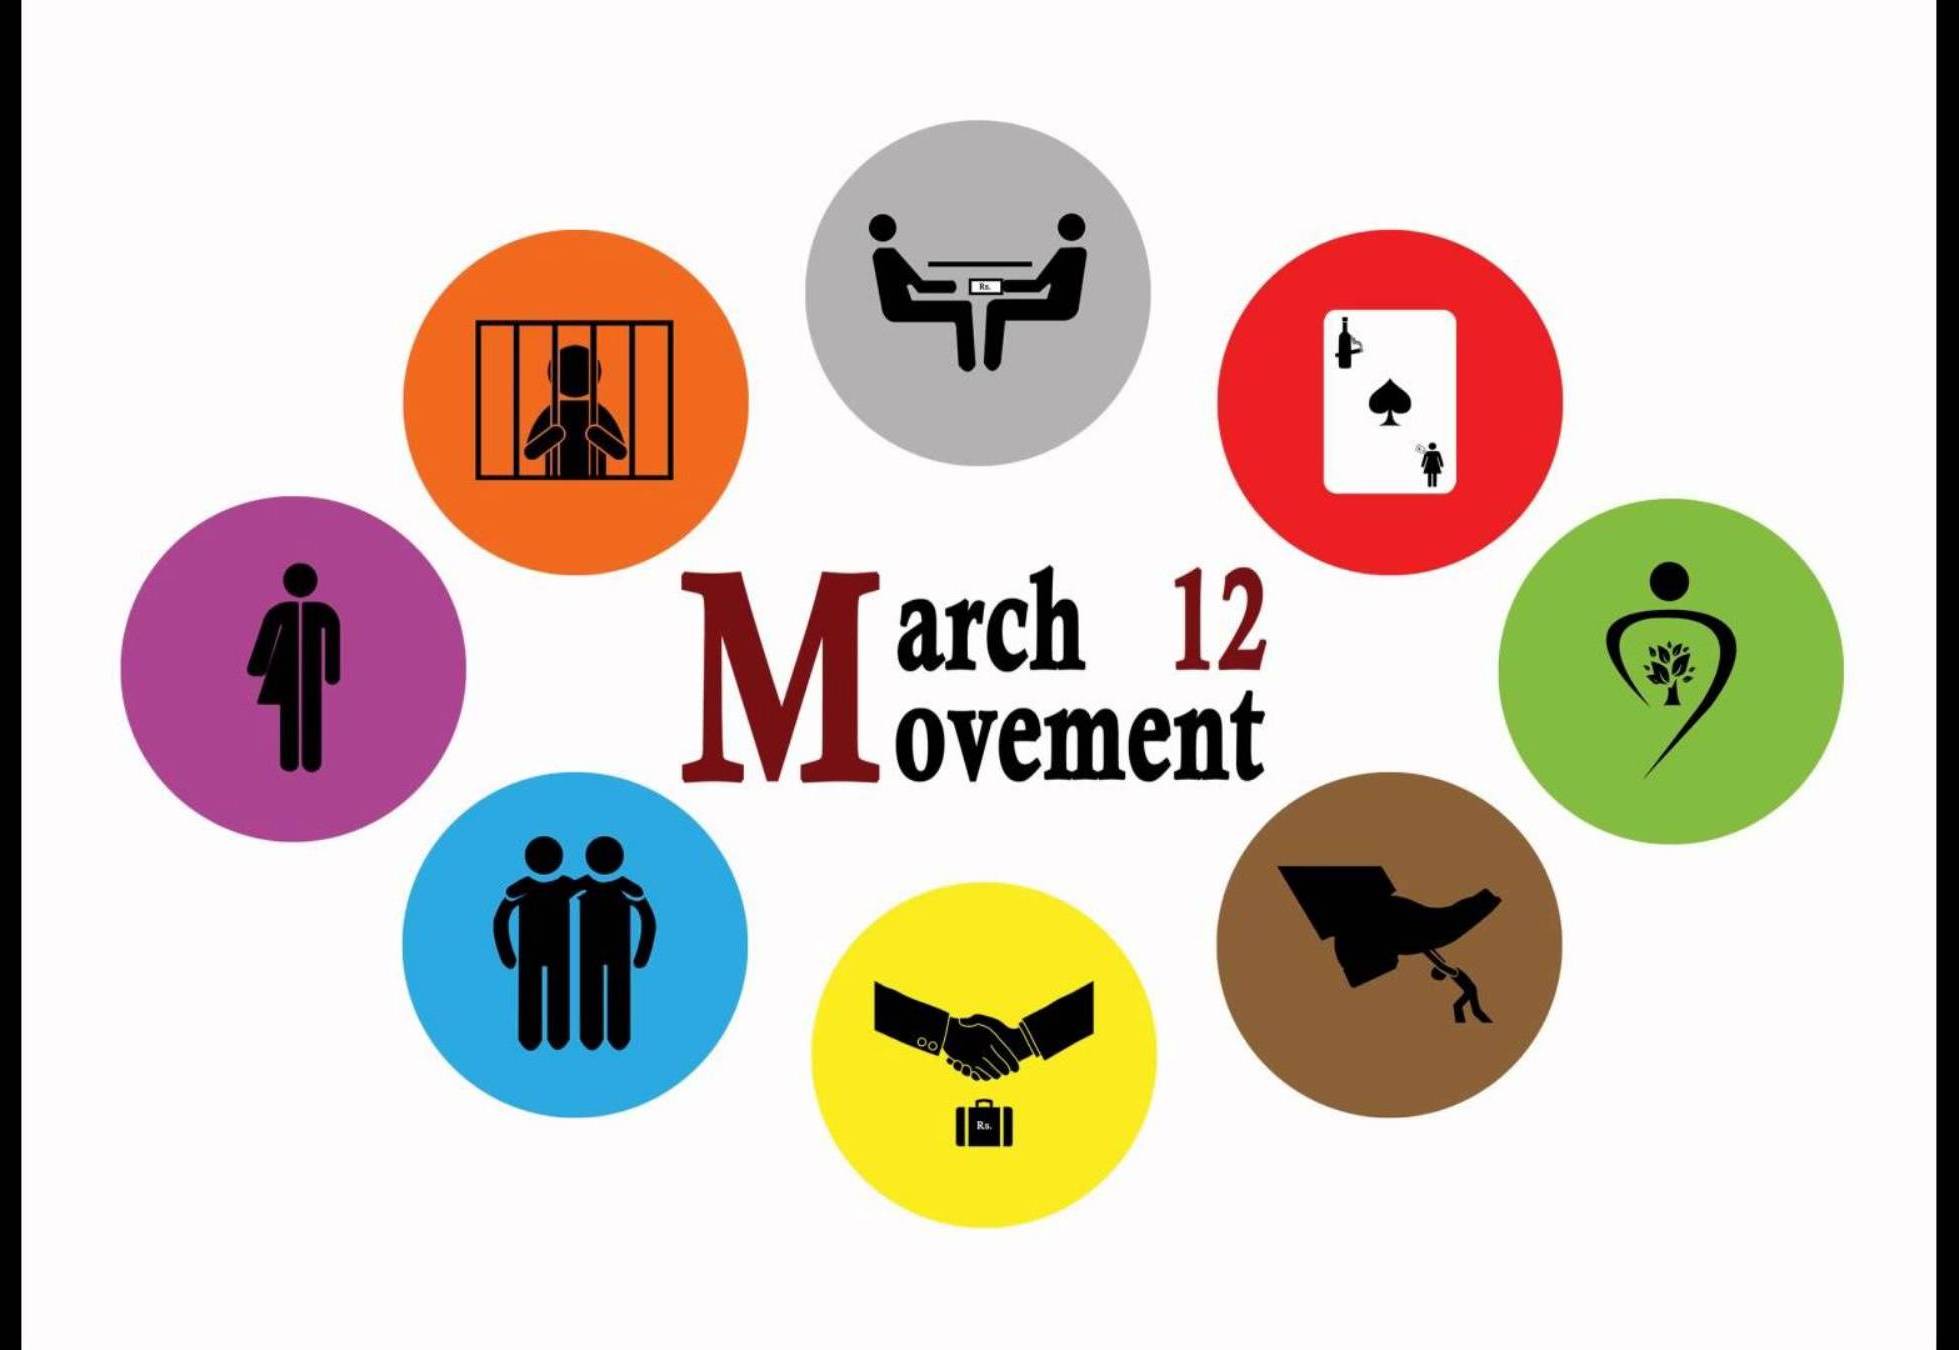 March 12 Movement for Clean Politicians - icon widely shared in social media